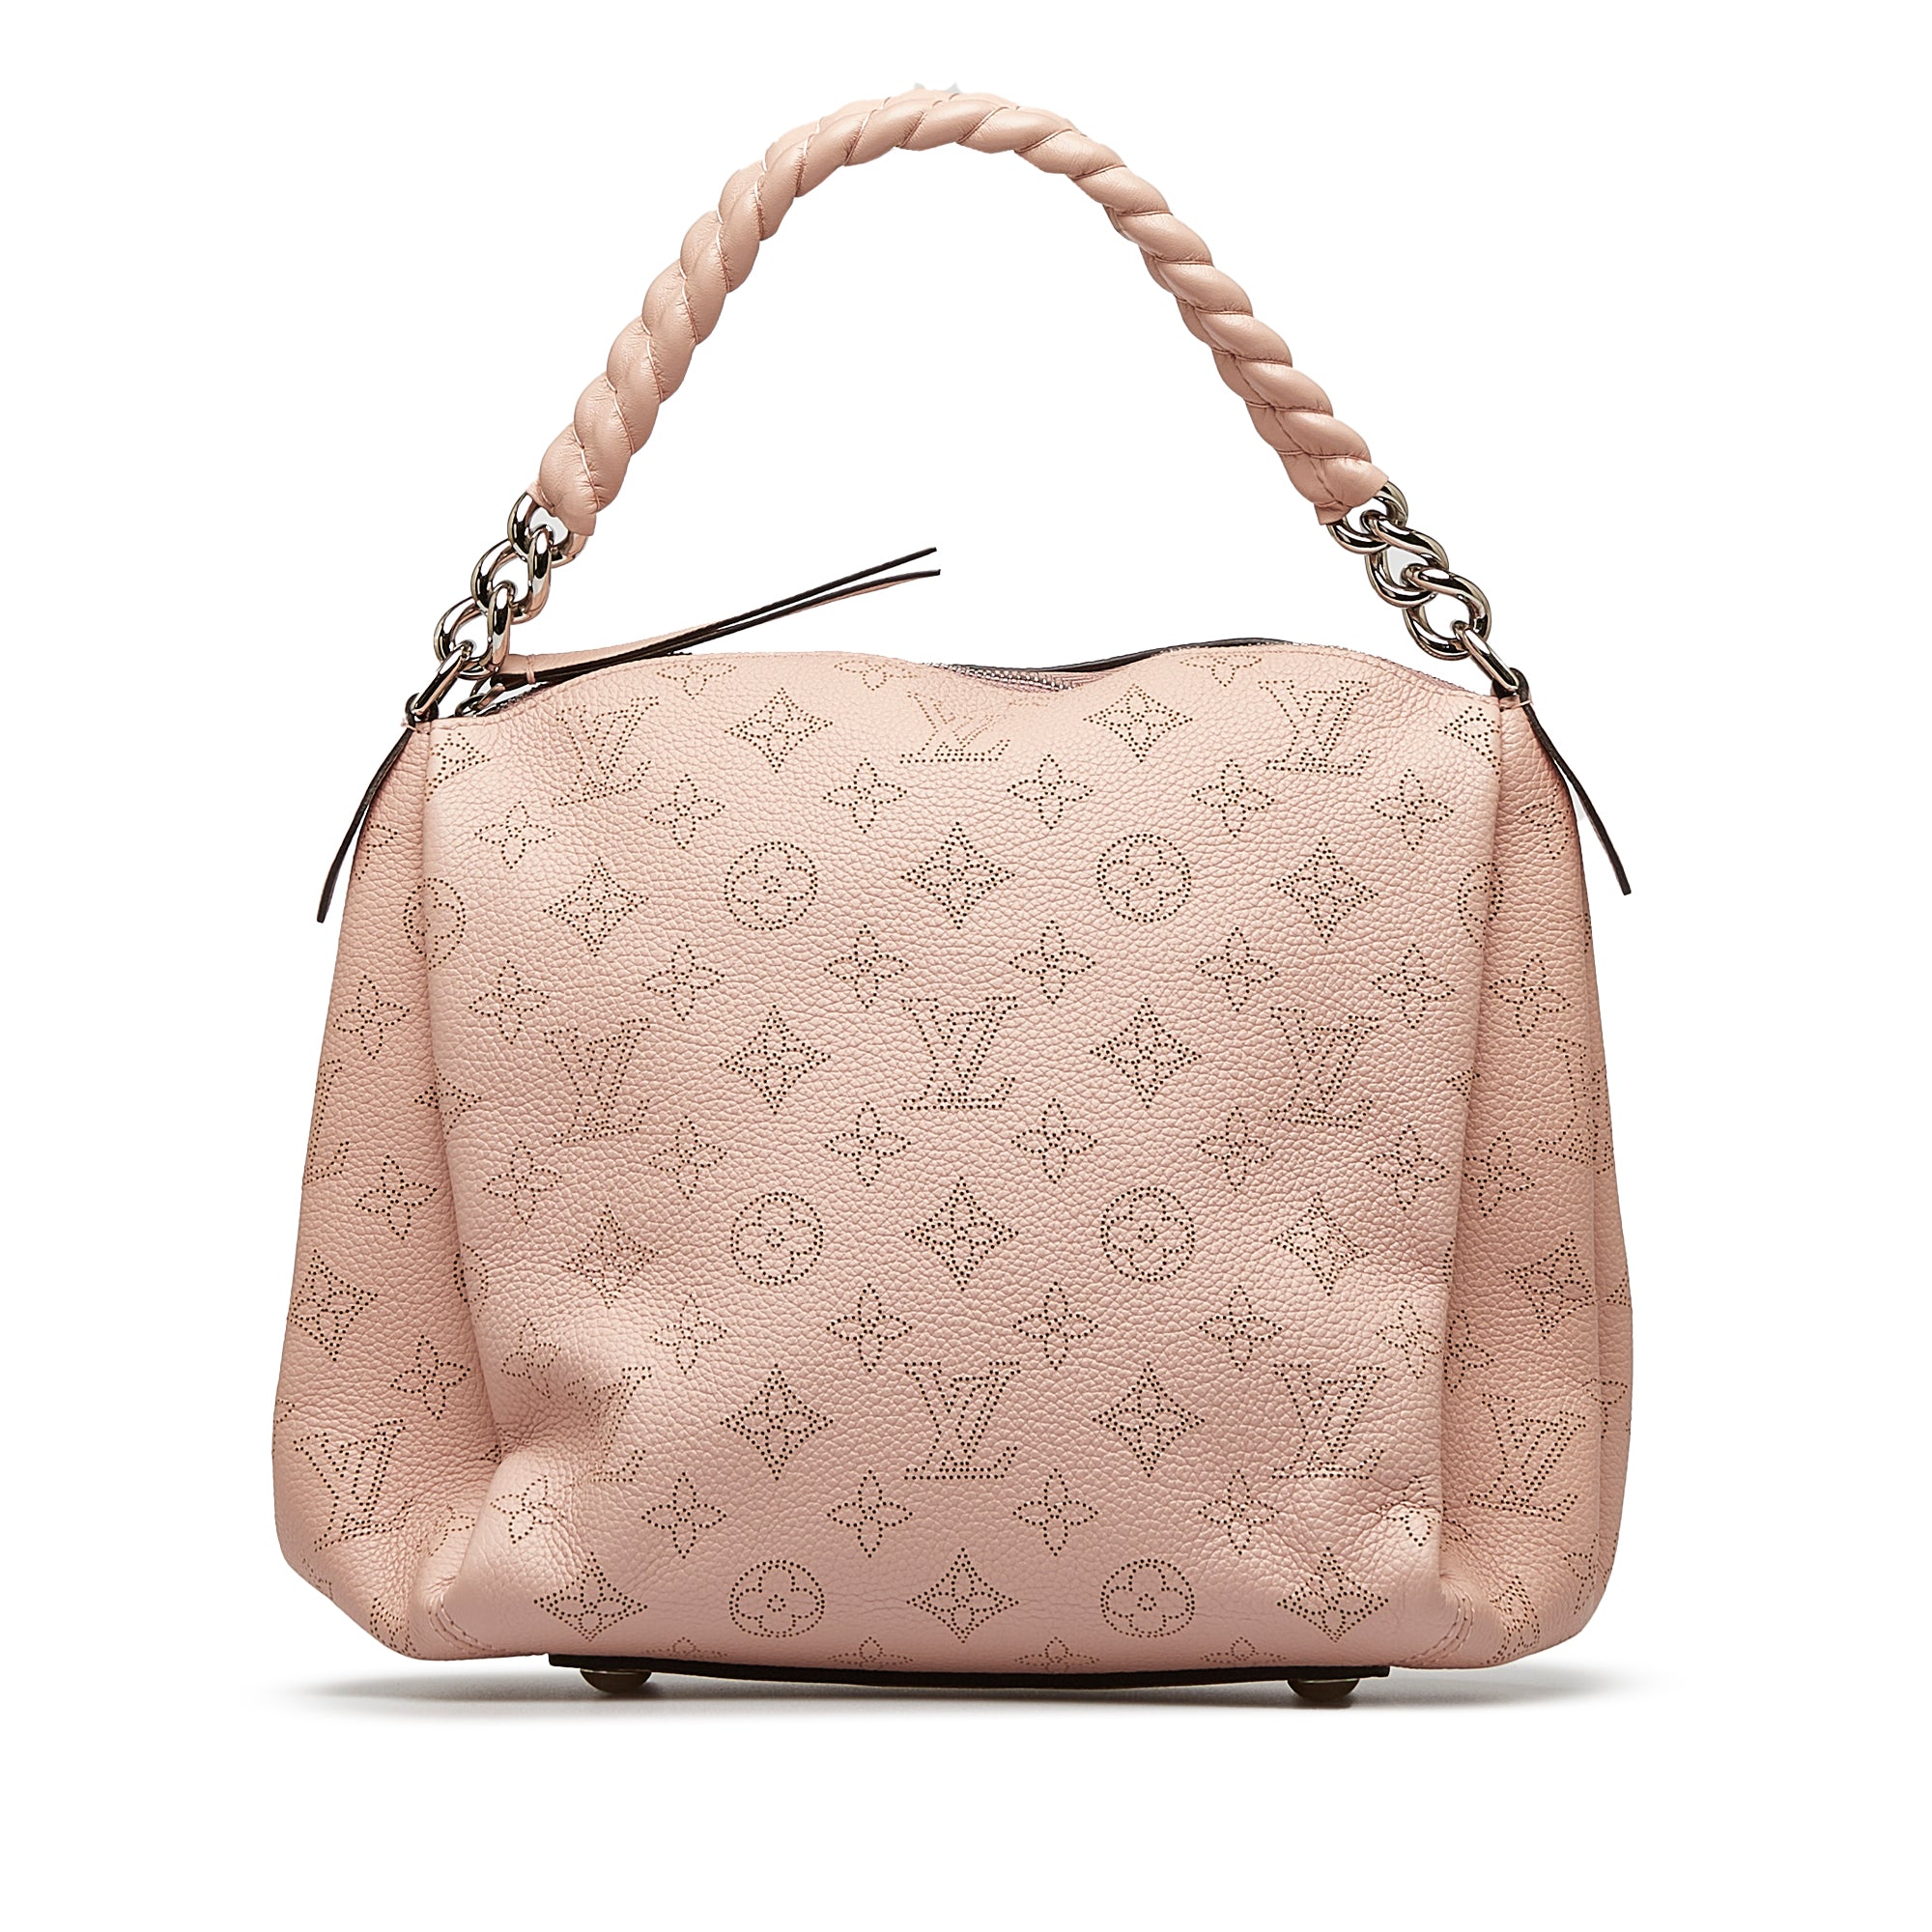 Lv locky bb pink with scarf  Pink louis vuitton bag, Bags, Luxury bags  collection